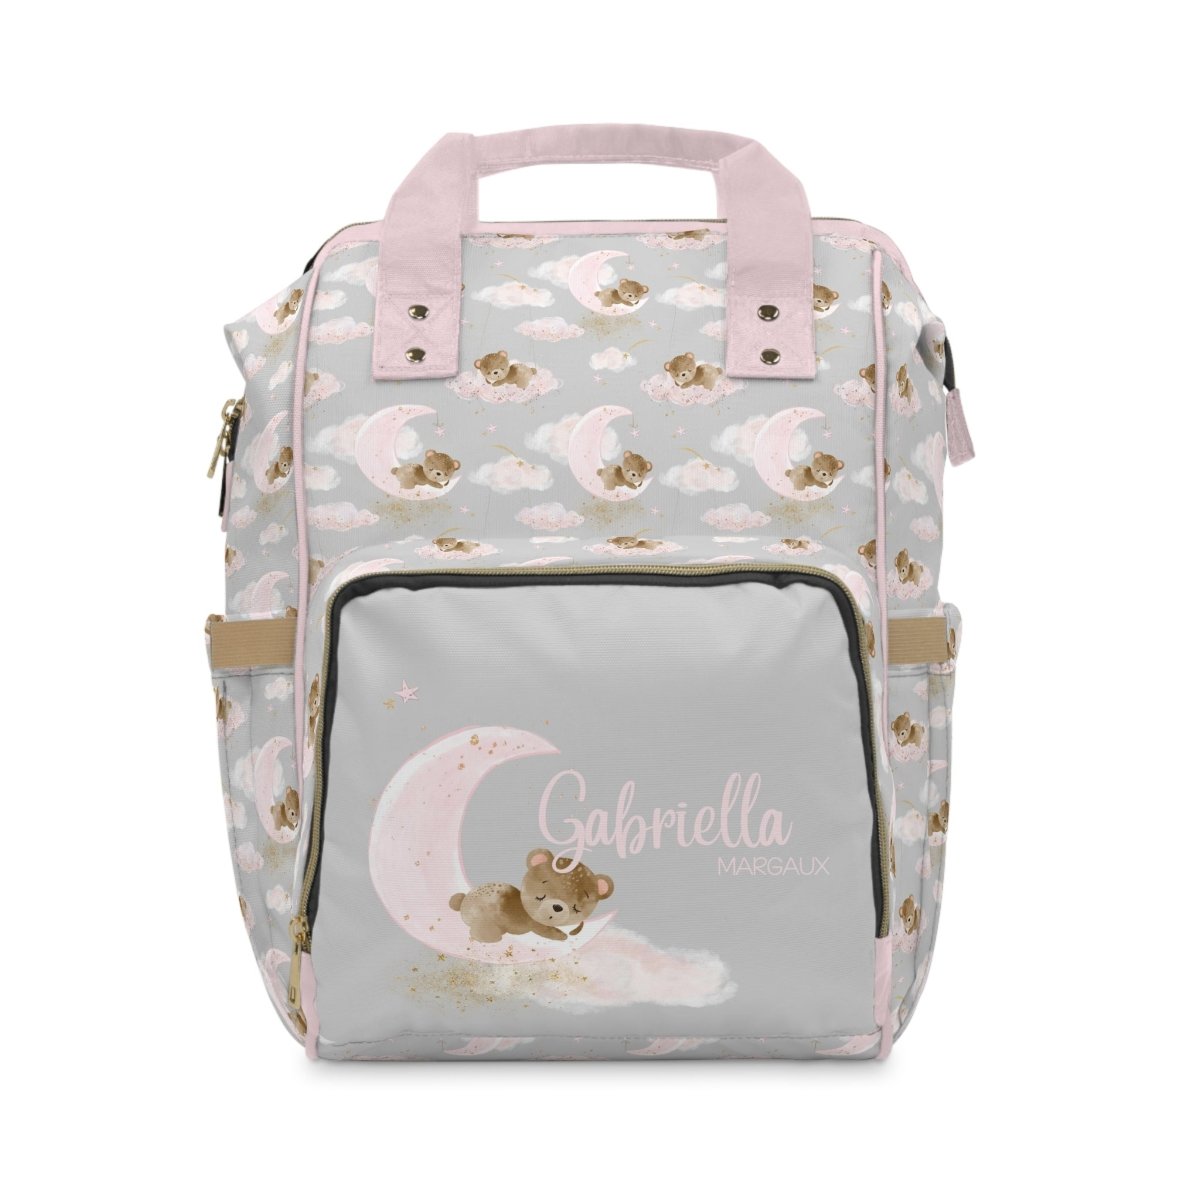 Pink Teddy Bear Personalized Backpack Diaper Bag - gender_girl, Pink Teddy Bear, text